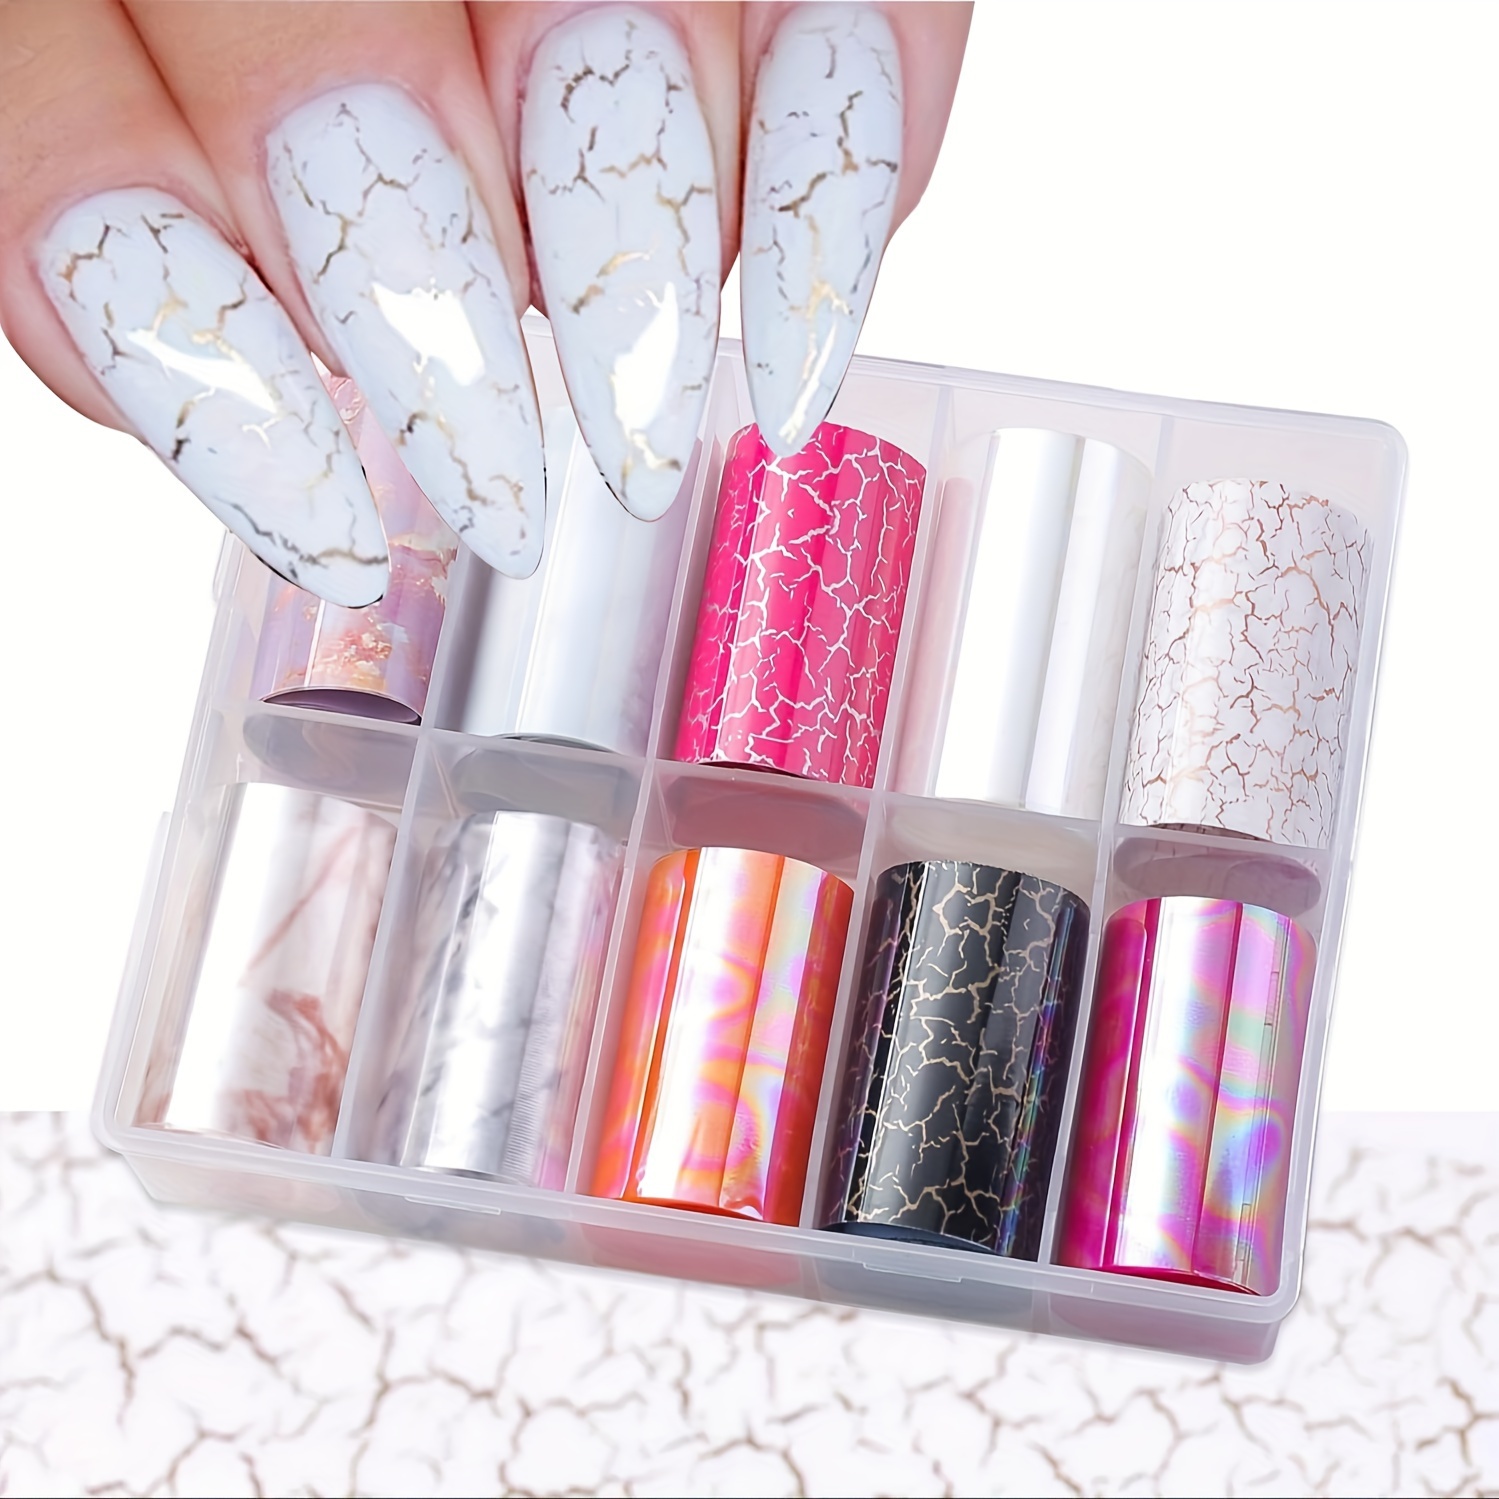 

neon Fantasy" Holographic Nail Foil Transfer Stickers - 10 Rolls, Iridescent Marble & Neon Designs For Diy Manicure